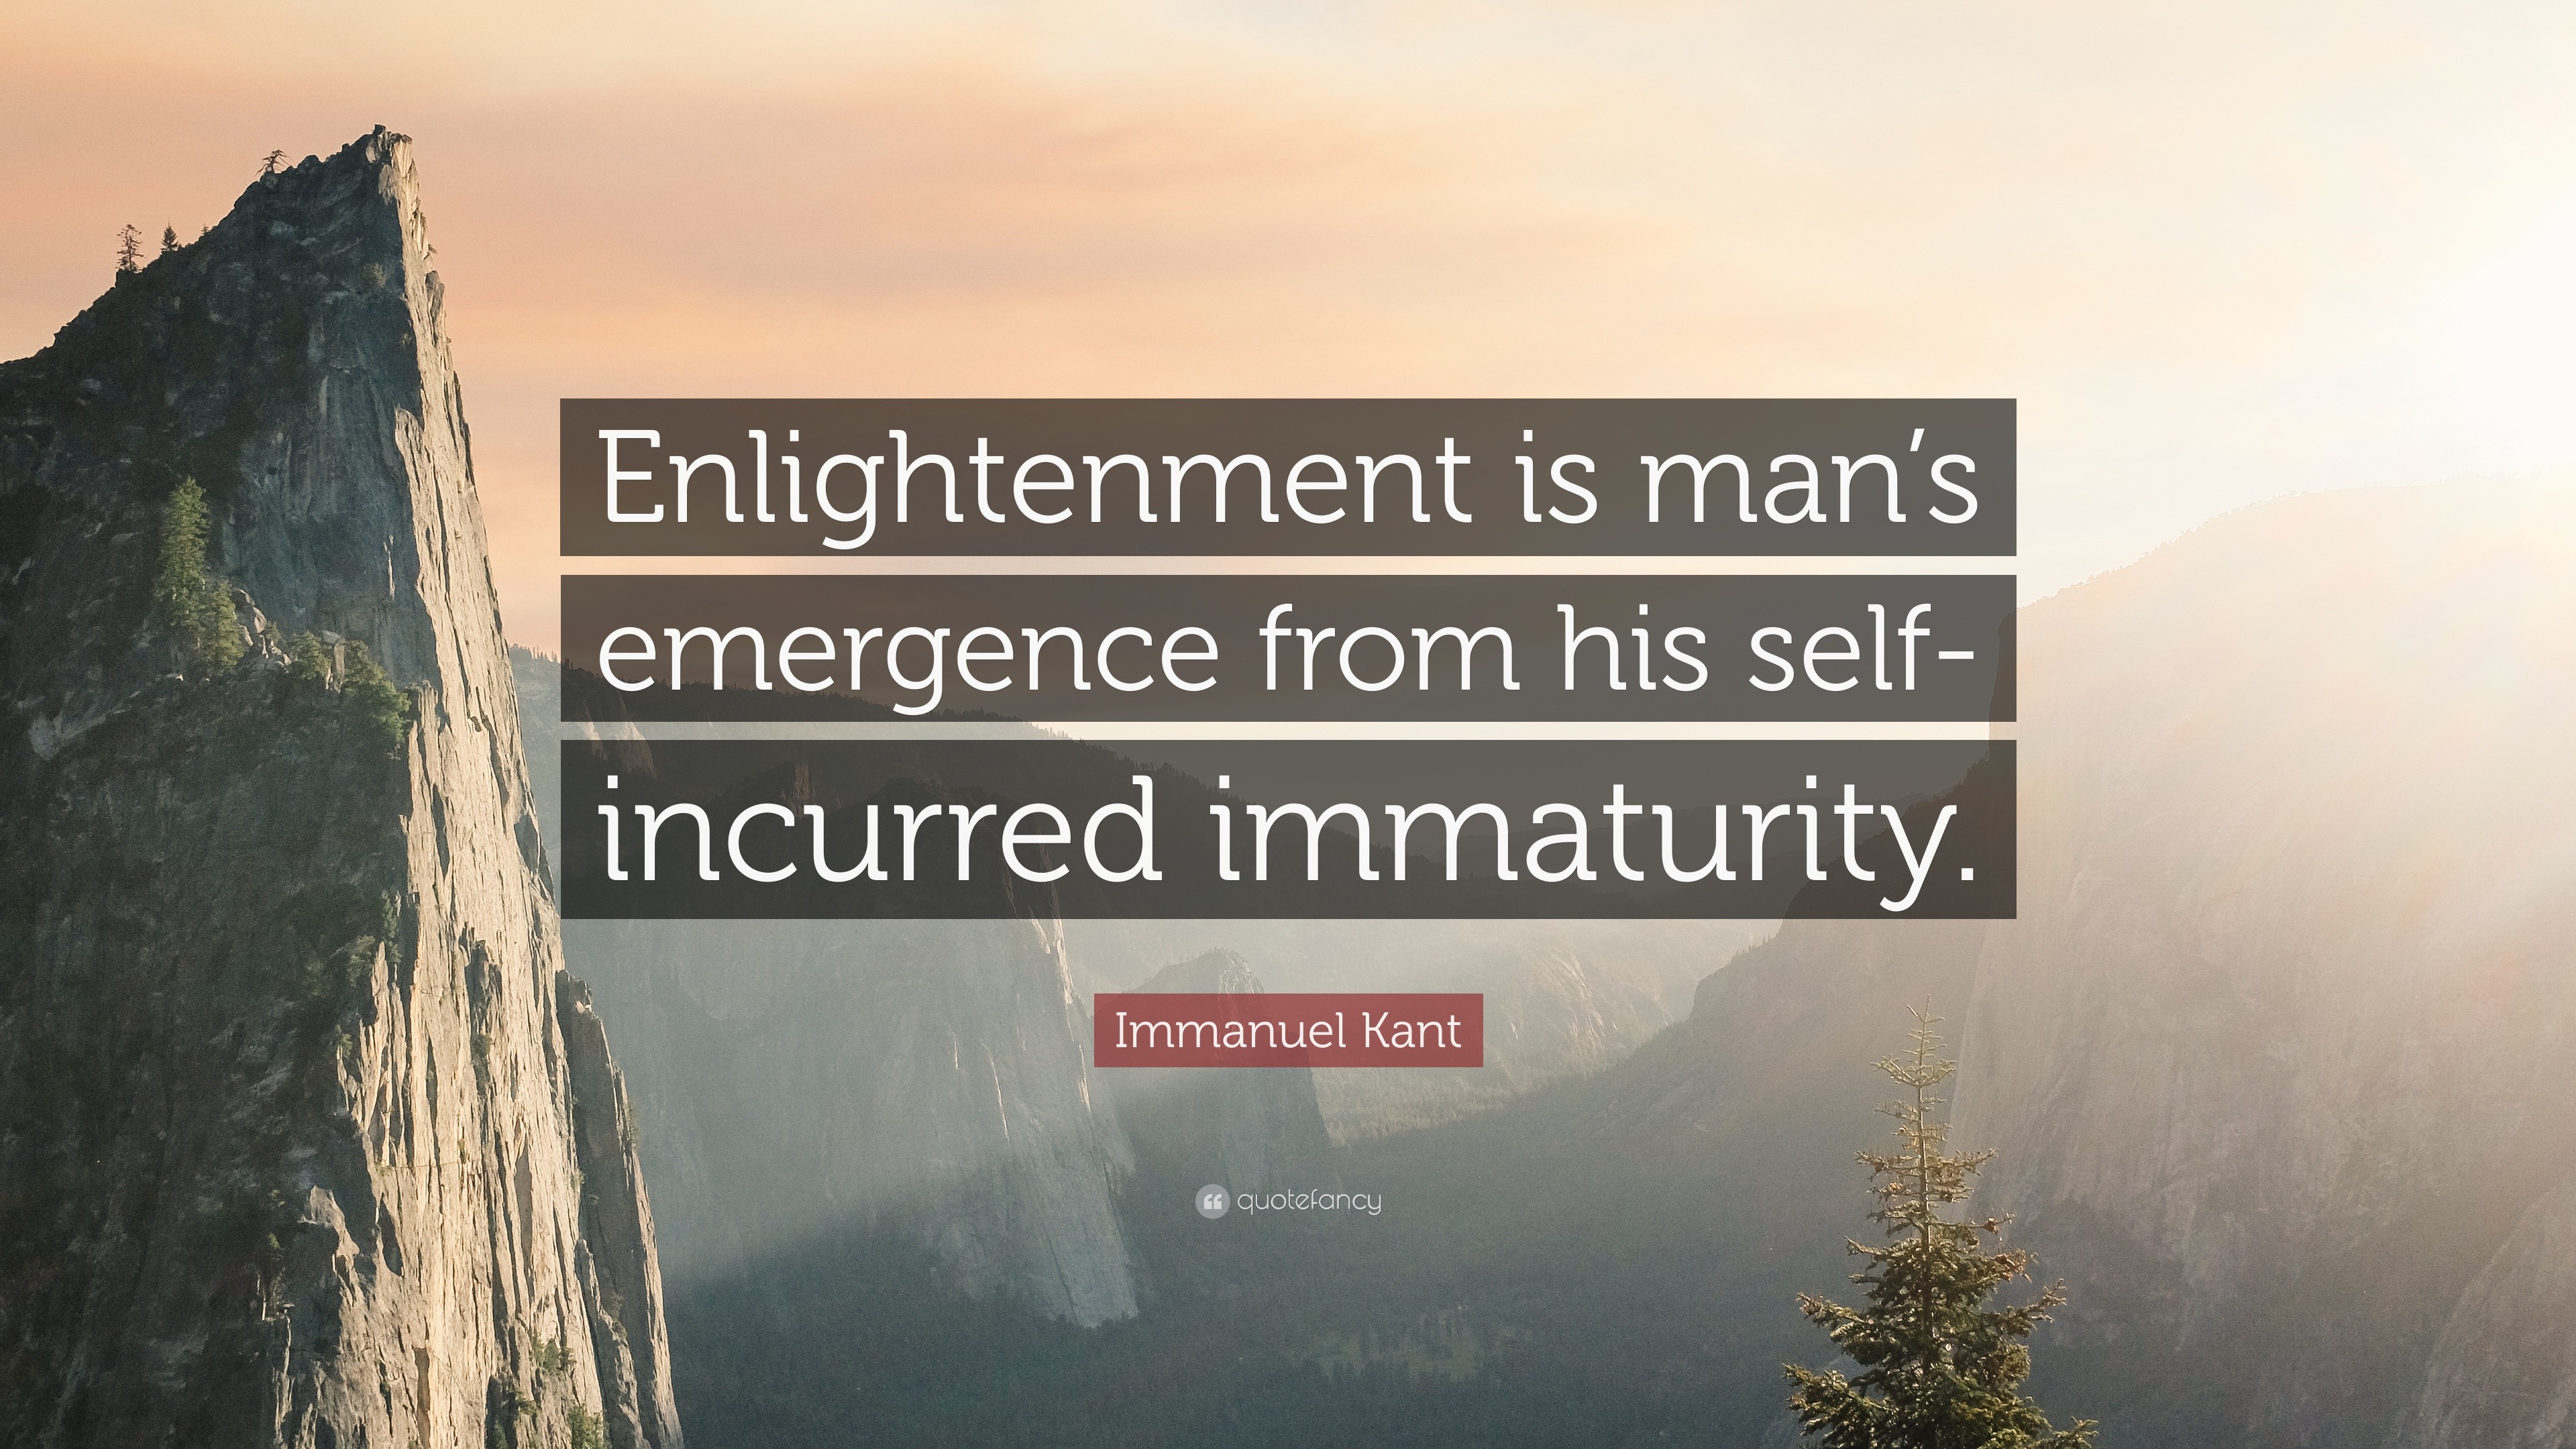 Immanuel Kant Quote: “Enlightenment is man’s emergence from his self